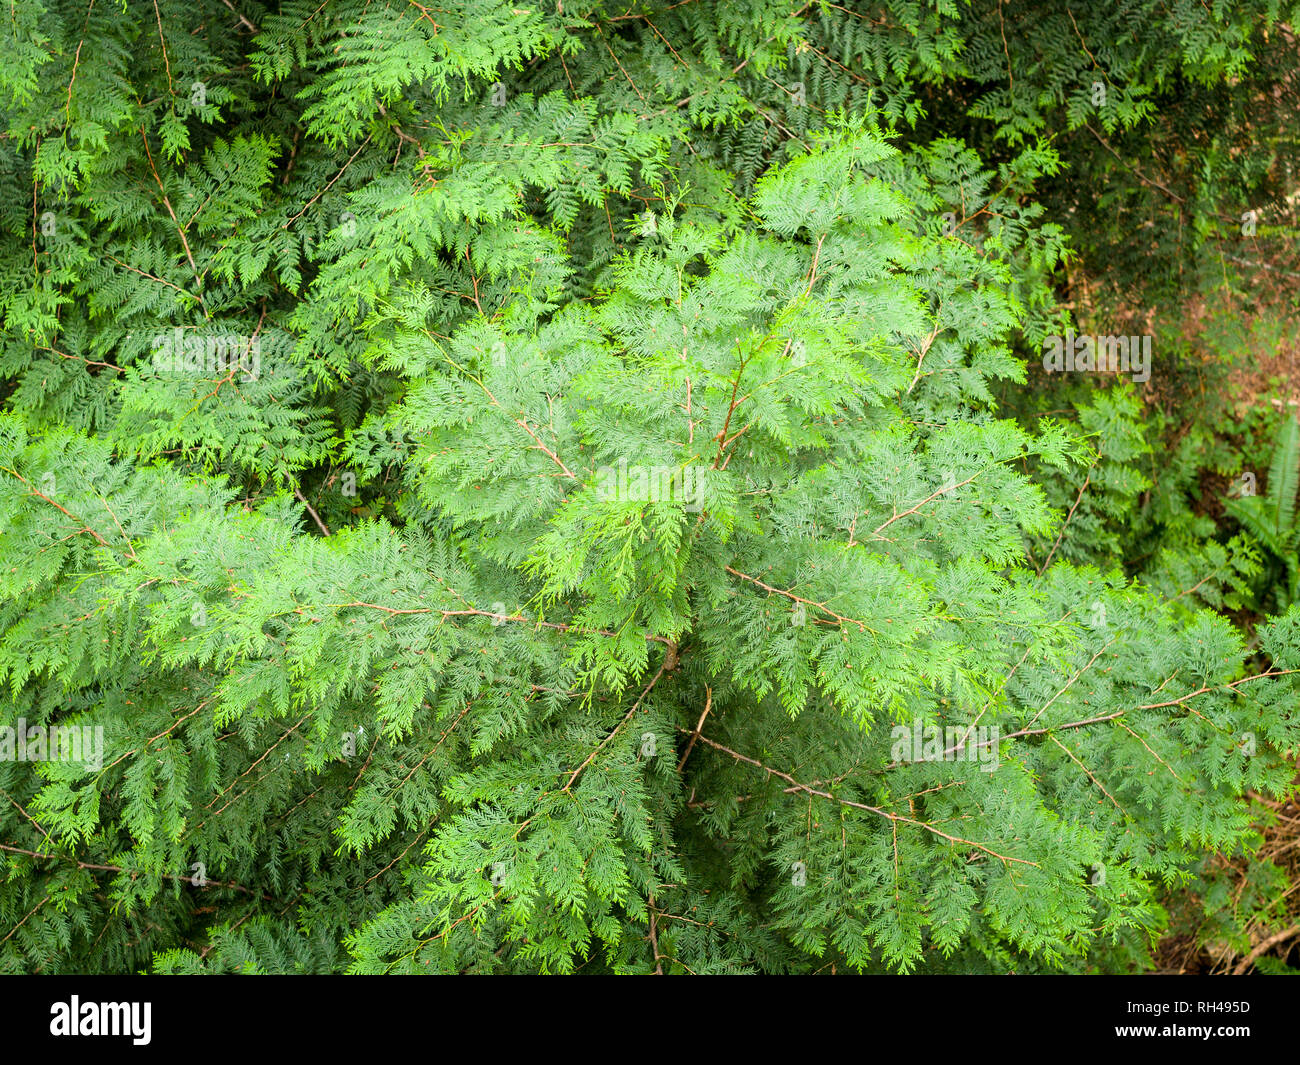 Reaching for the Light: A young Western Red Cedar sapling sprouts from the forest floor and reaches toward the canopy. Stock Photo